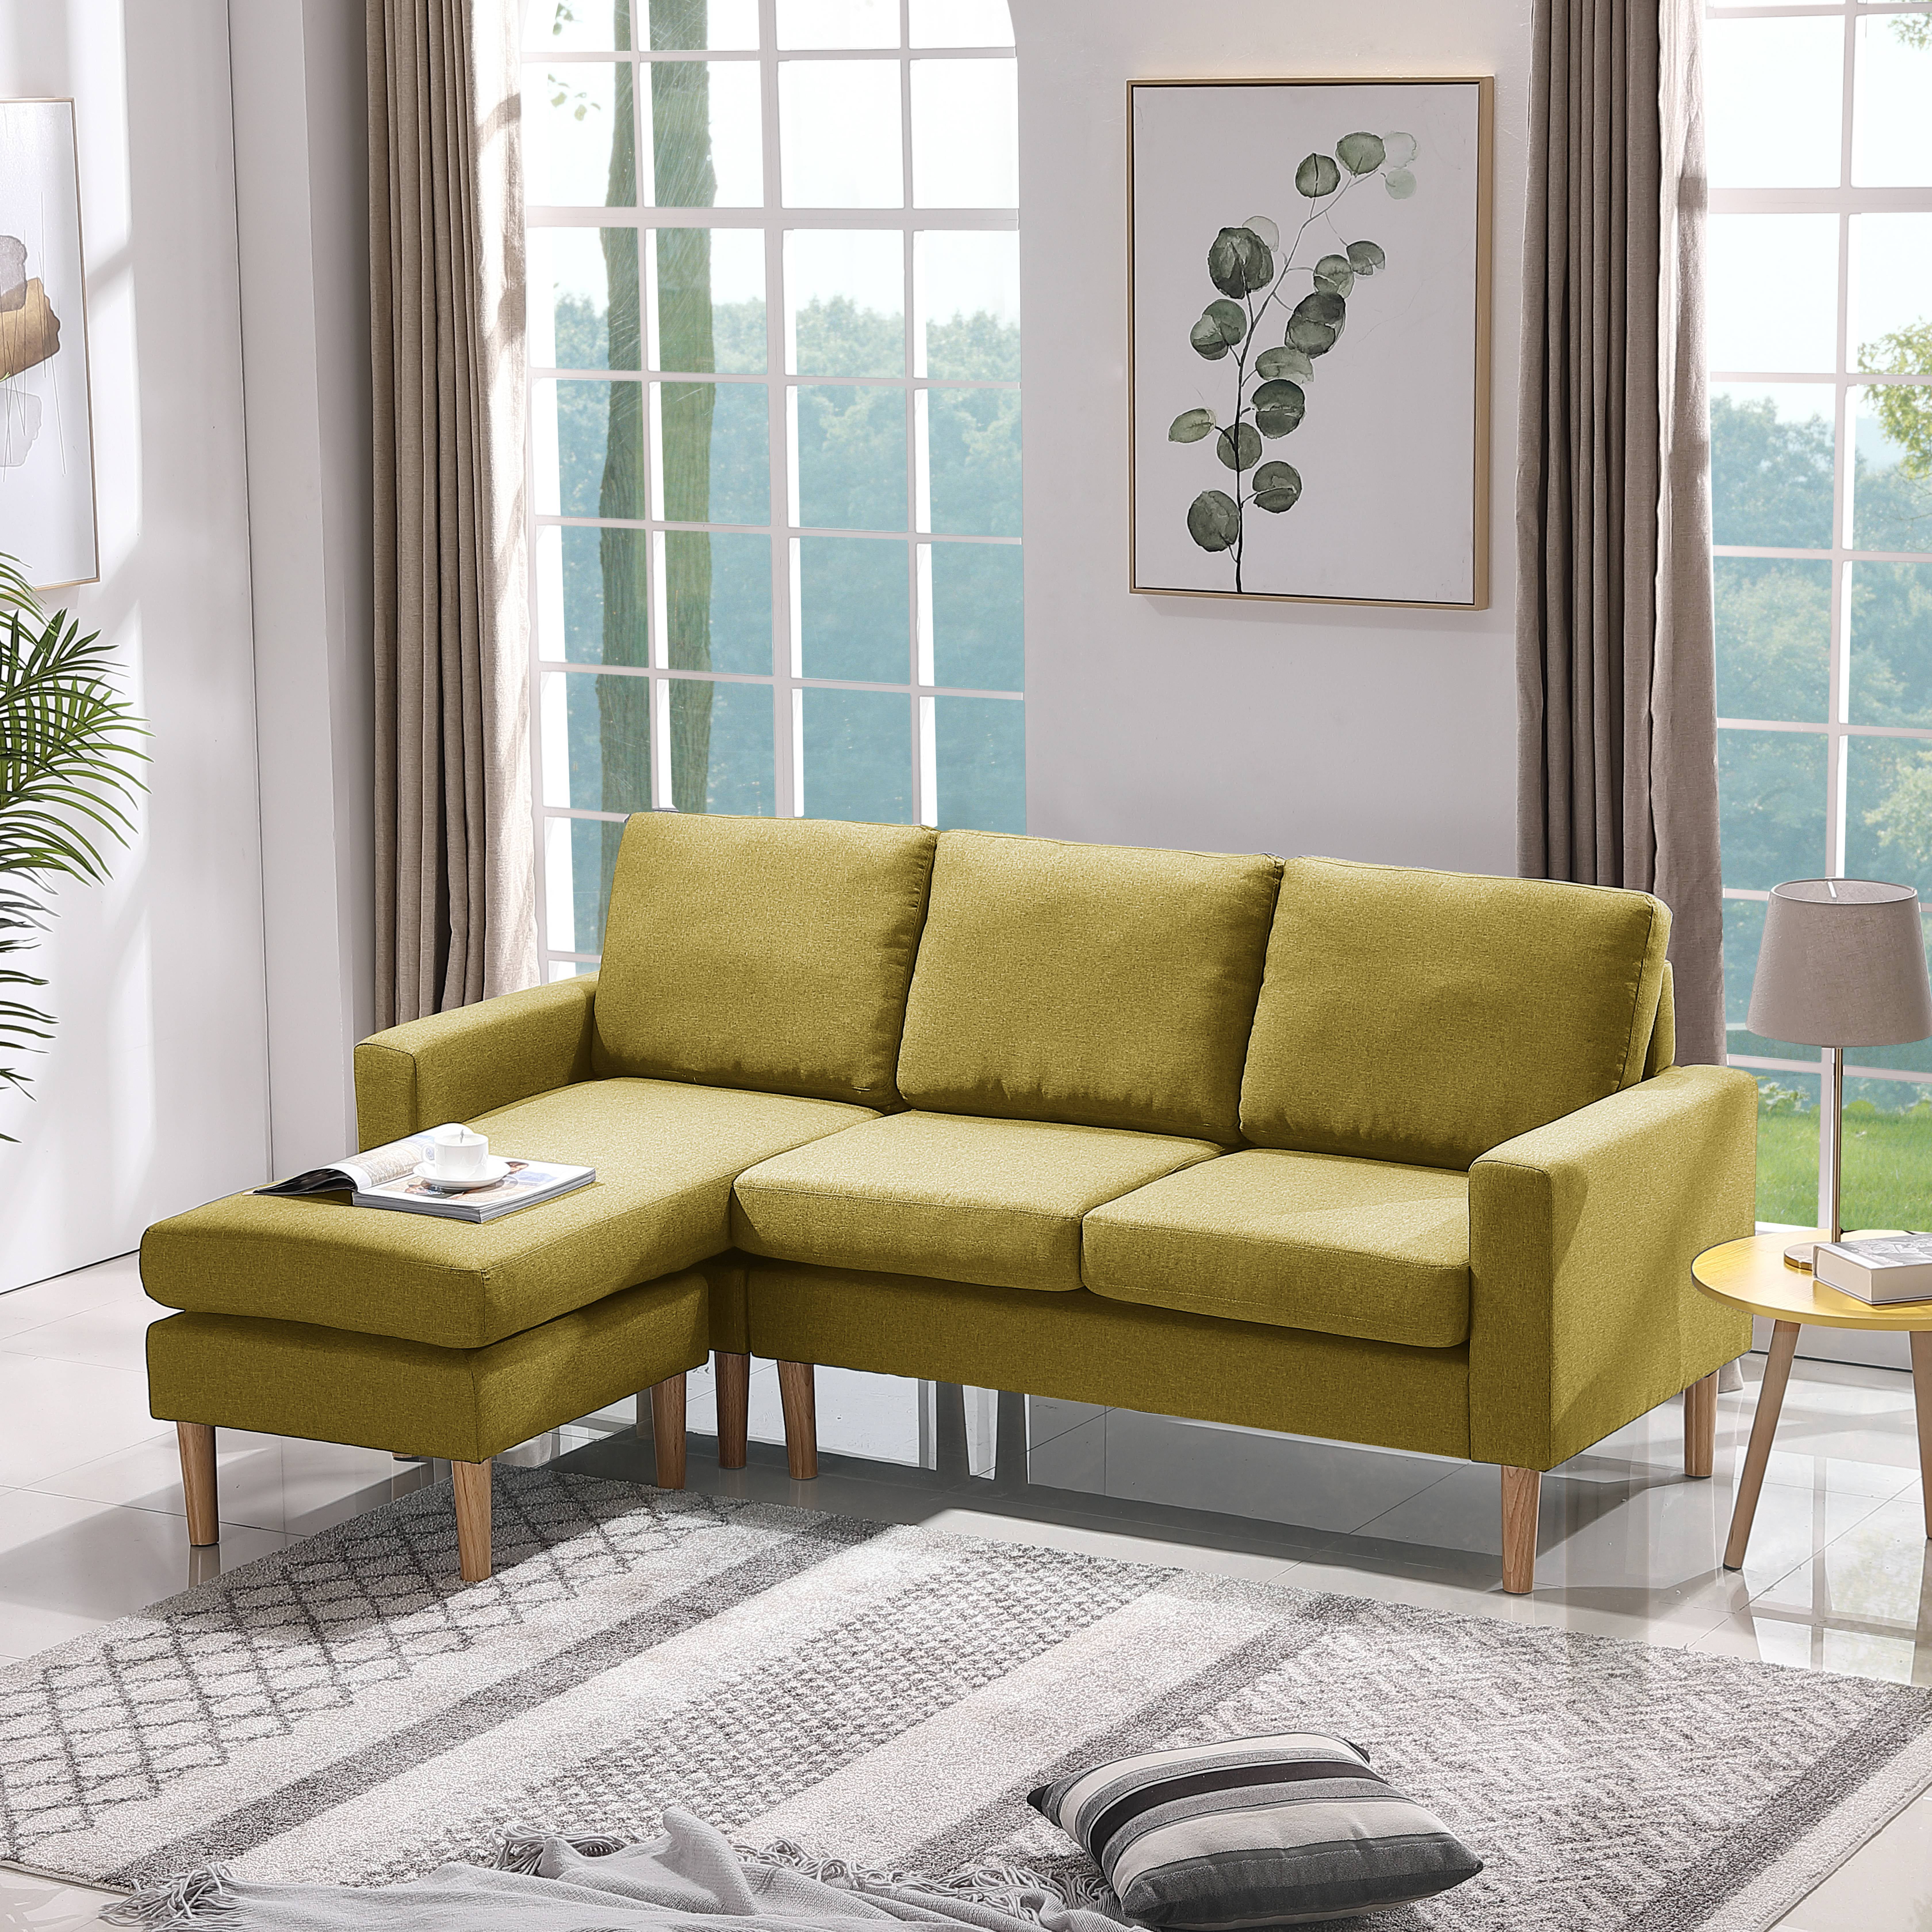 URHOMEPRO 77W Mid Century Couches And Sofas Set With Ottoman